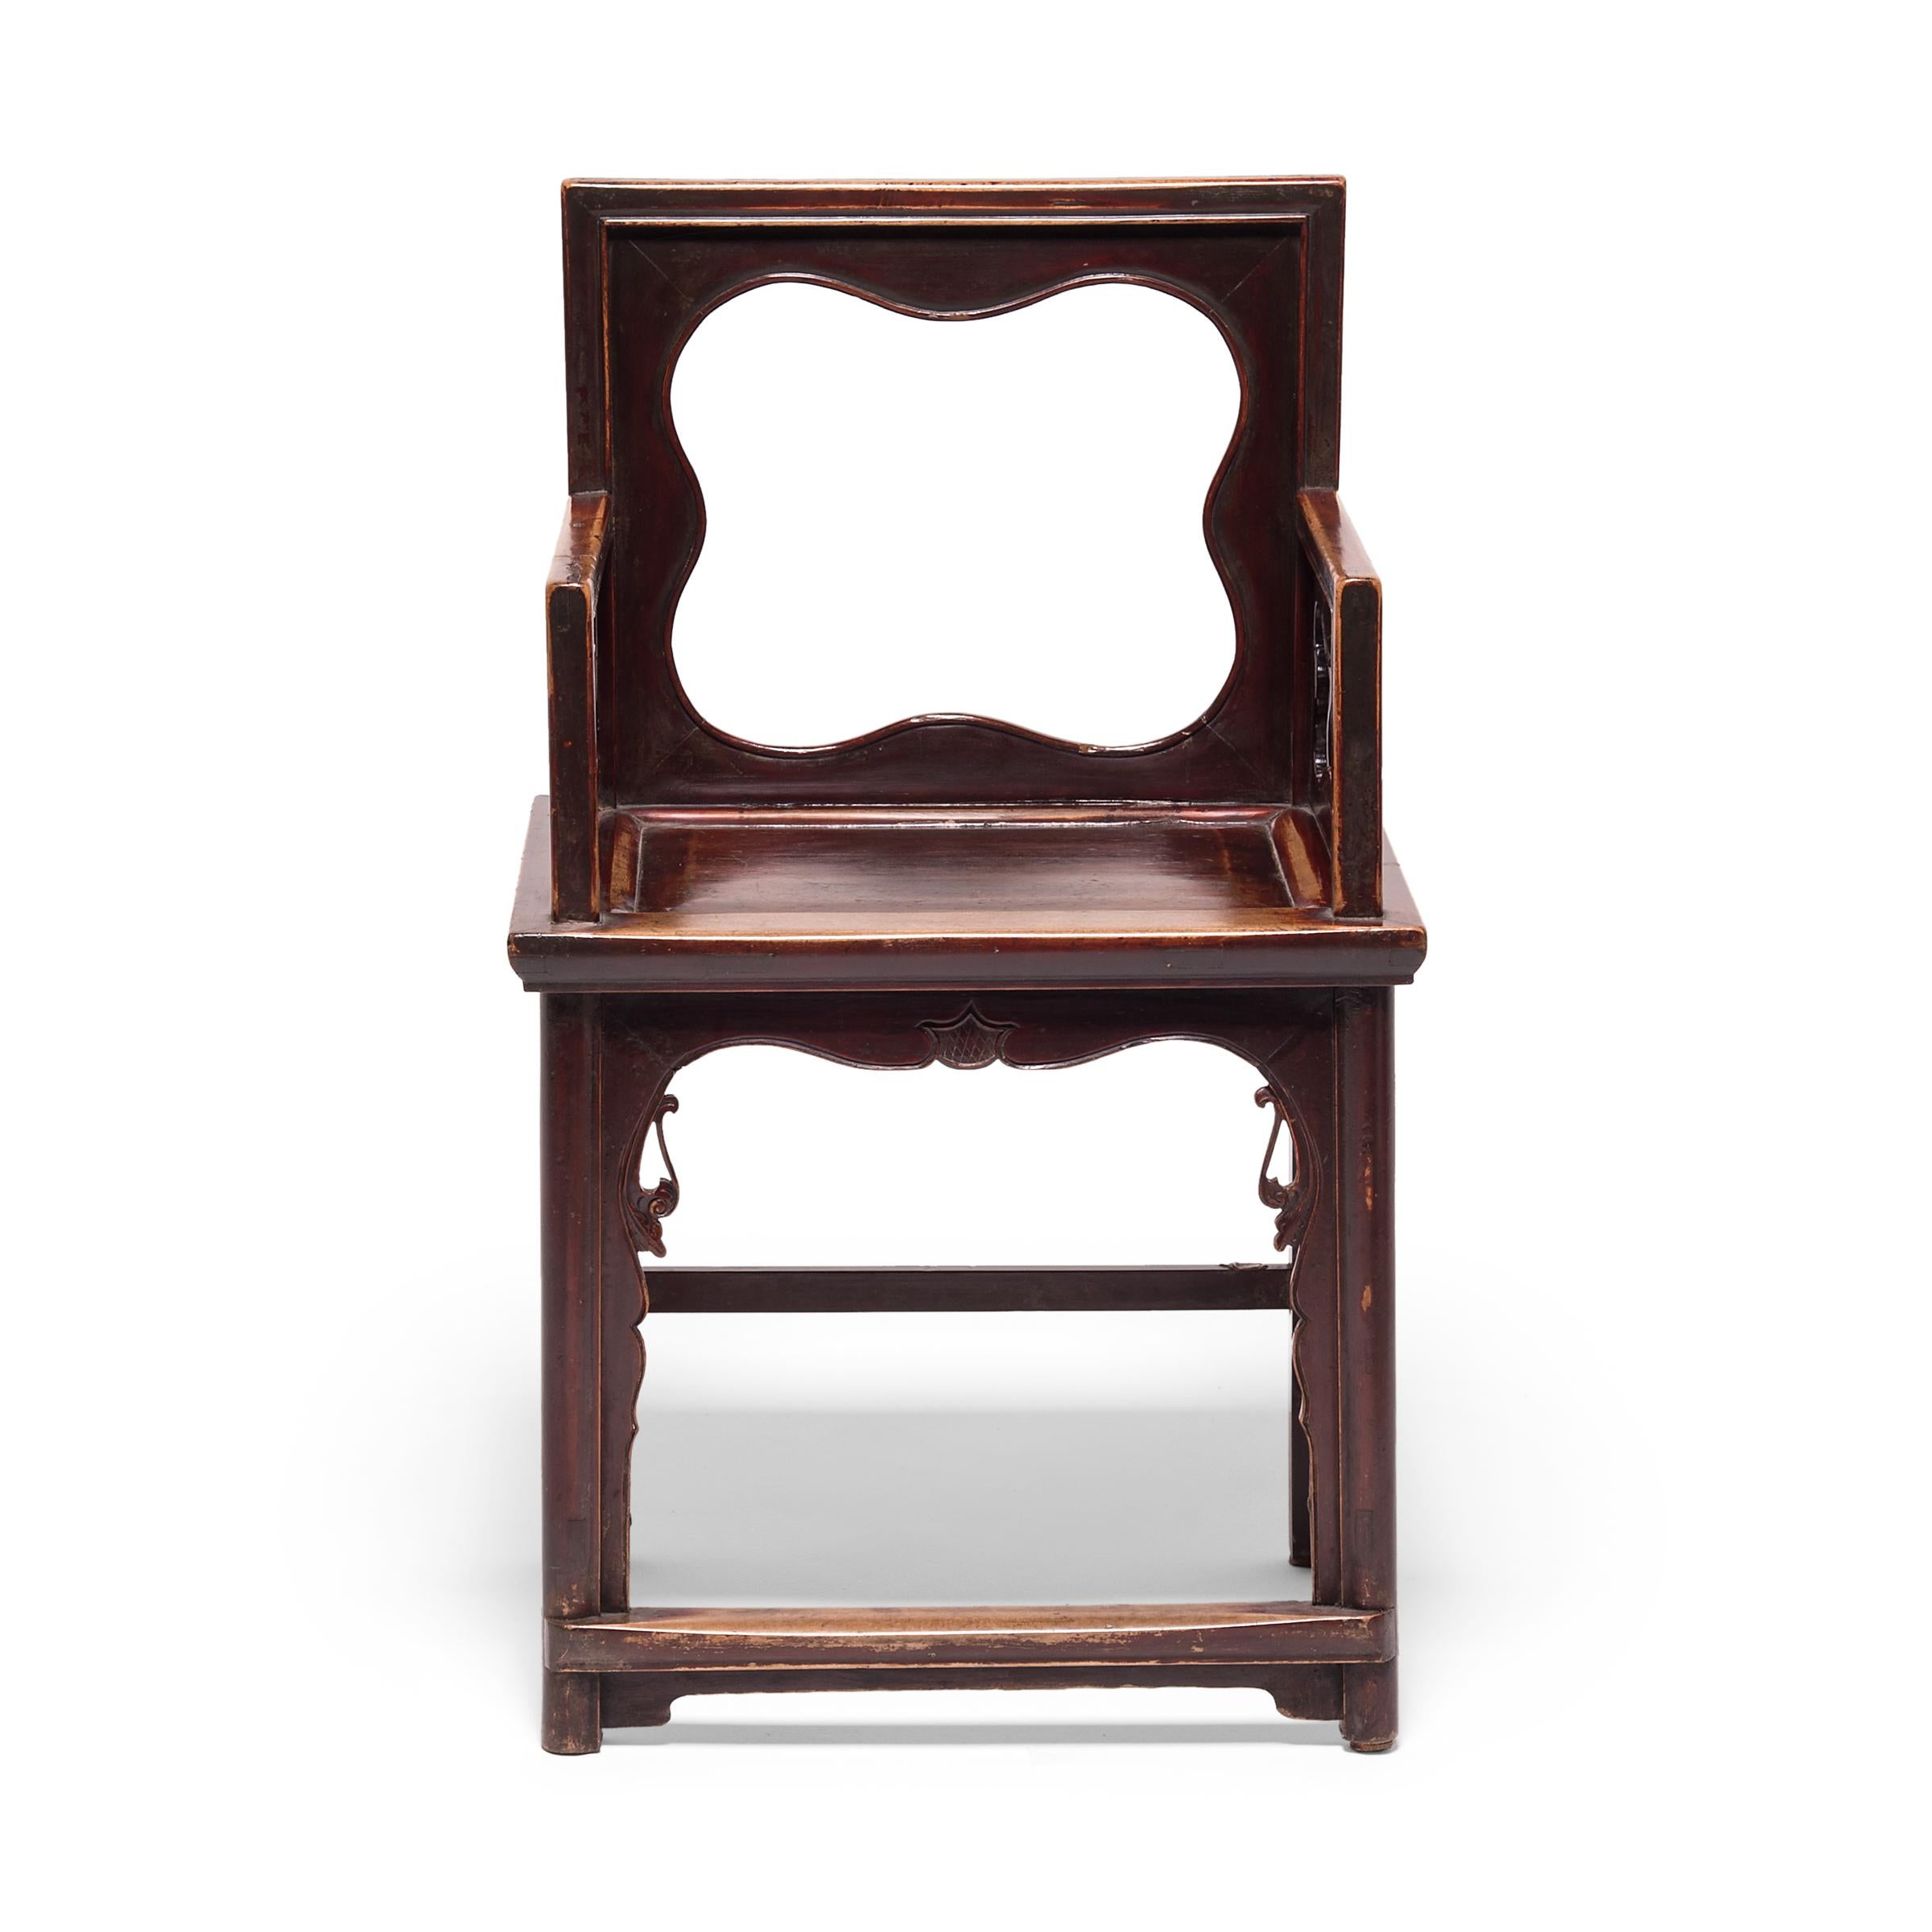 Walnut Pair of Chinese Rose Chairs with Quatrefoil Cutouts, c. 1850 For Sale